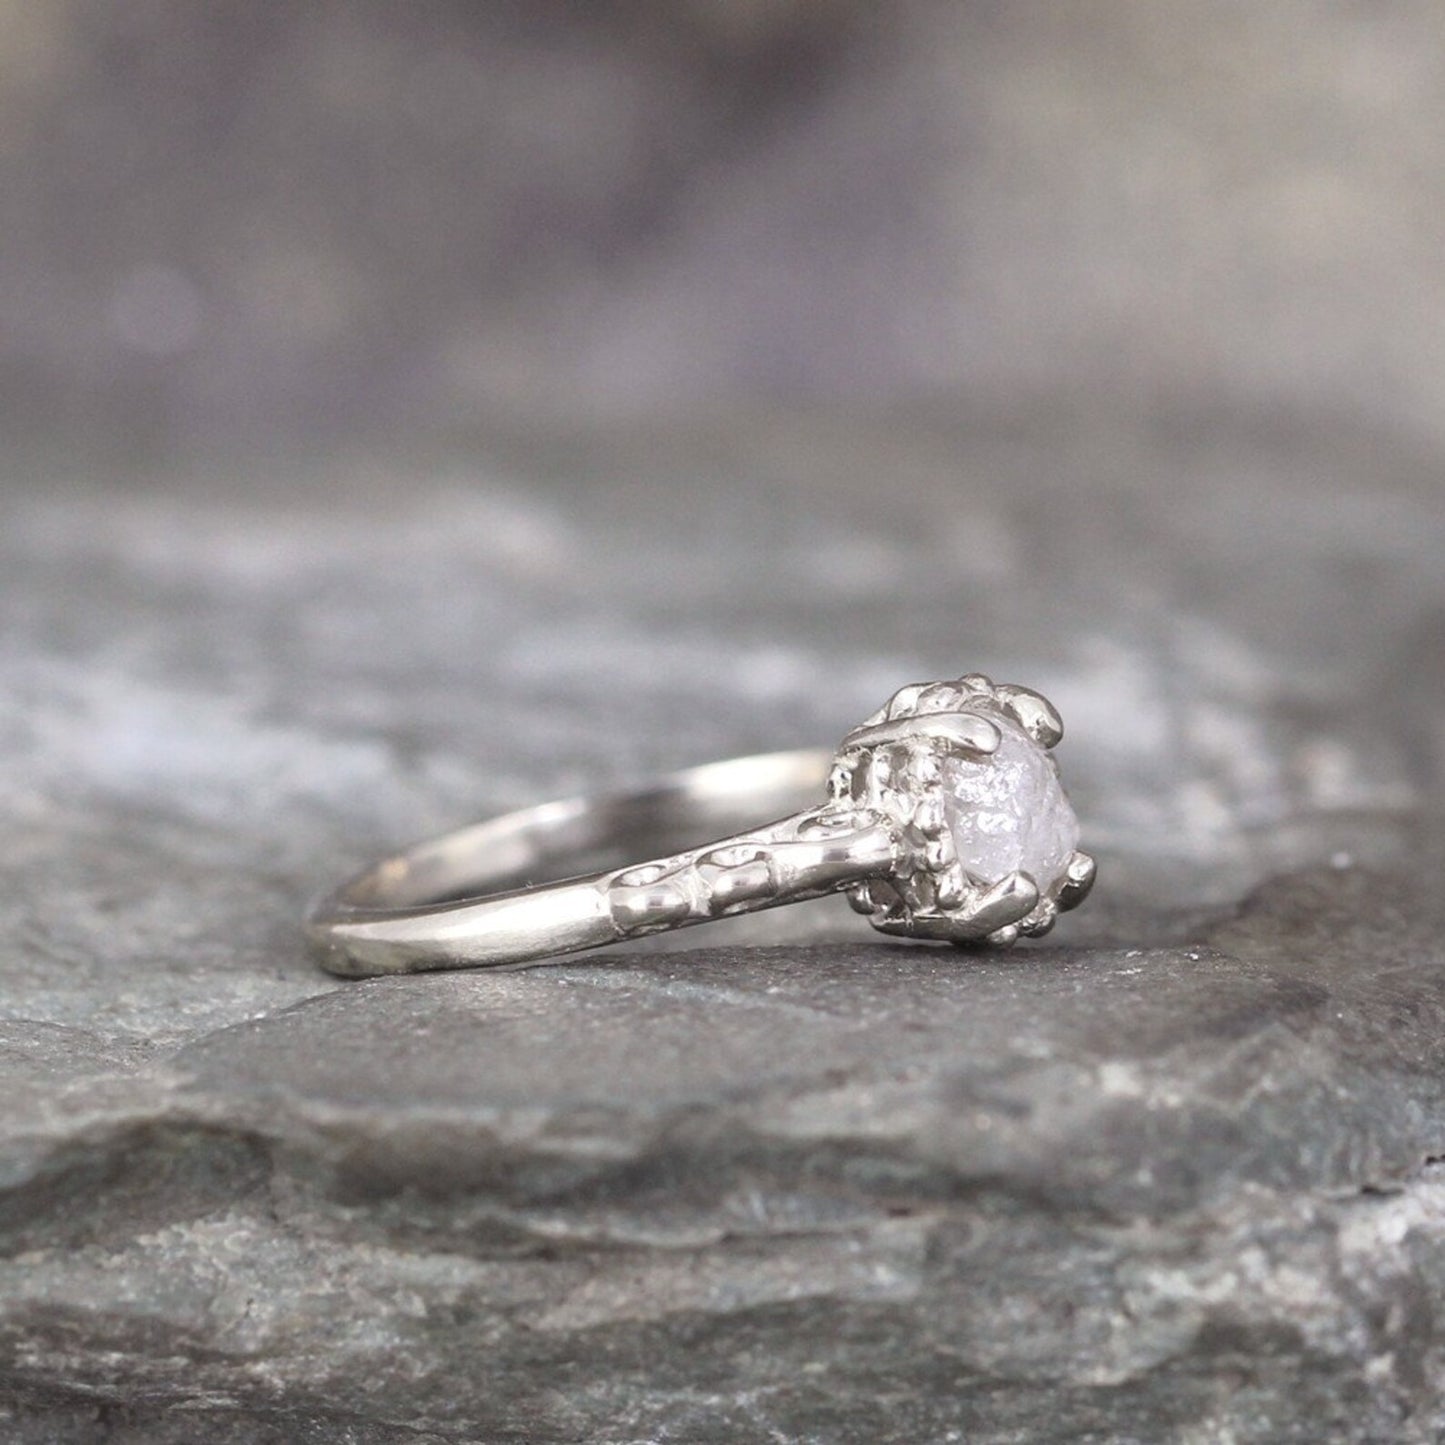 14K White Gold and Raw Diamond Ring - Filigree Style Engagement Ring